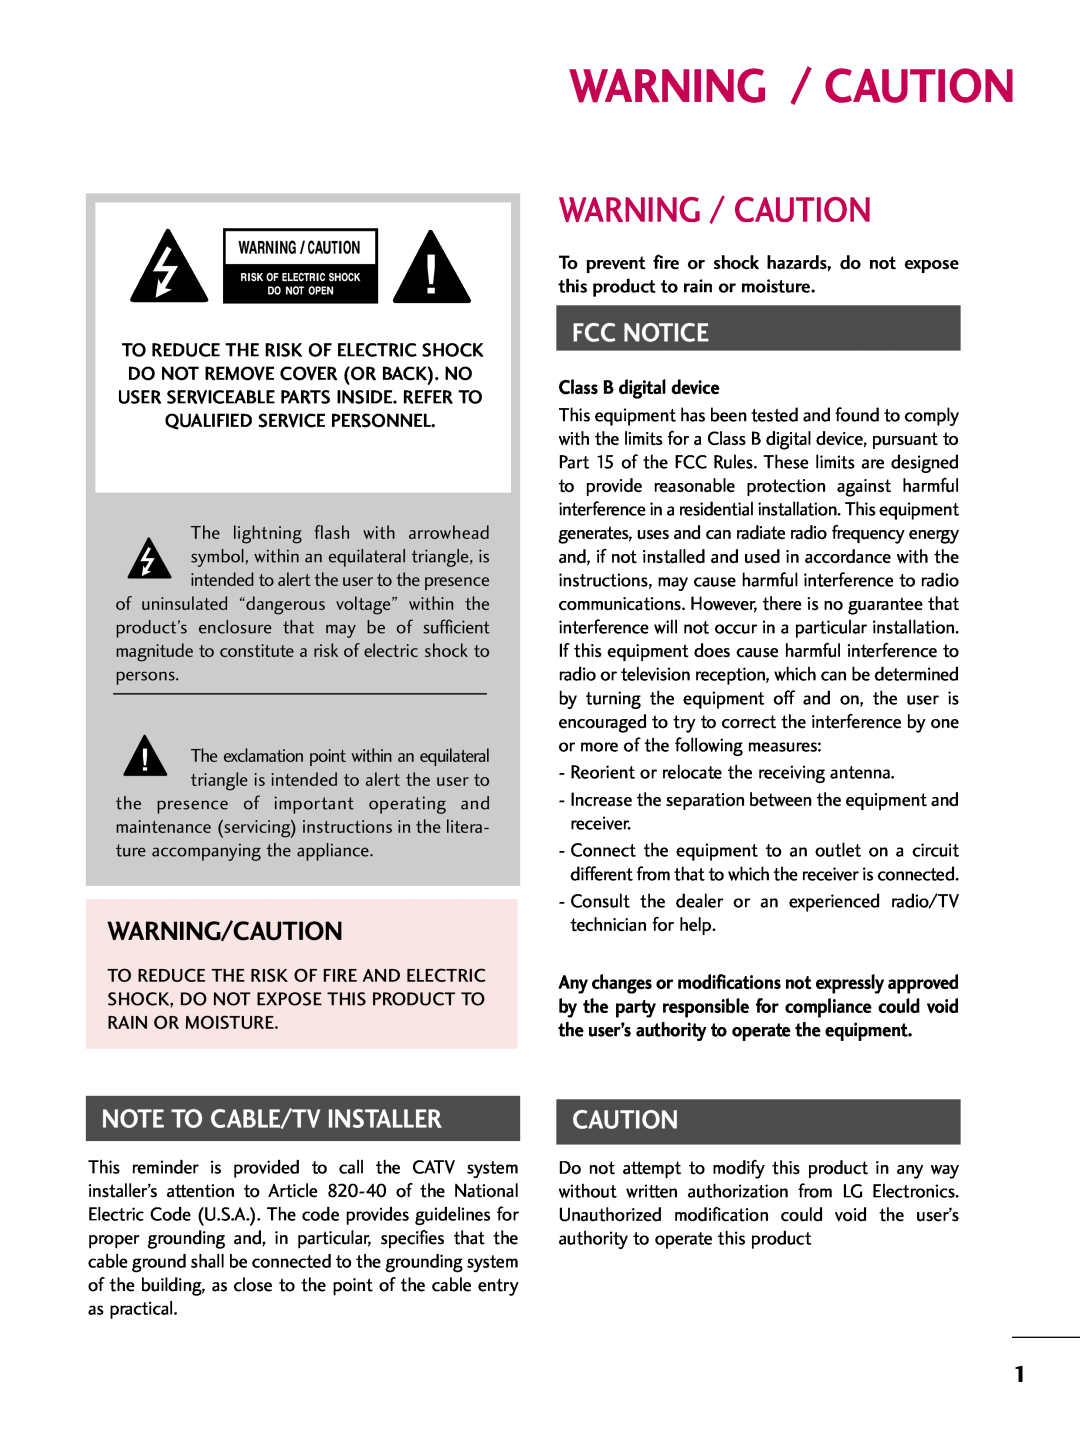 LG Electronics 50PG60 Warning / Caution, Warning/Caution, Class B digital device, Fcc Notice, Note To Cable/Tv Installer 